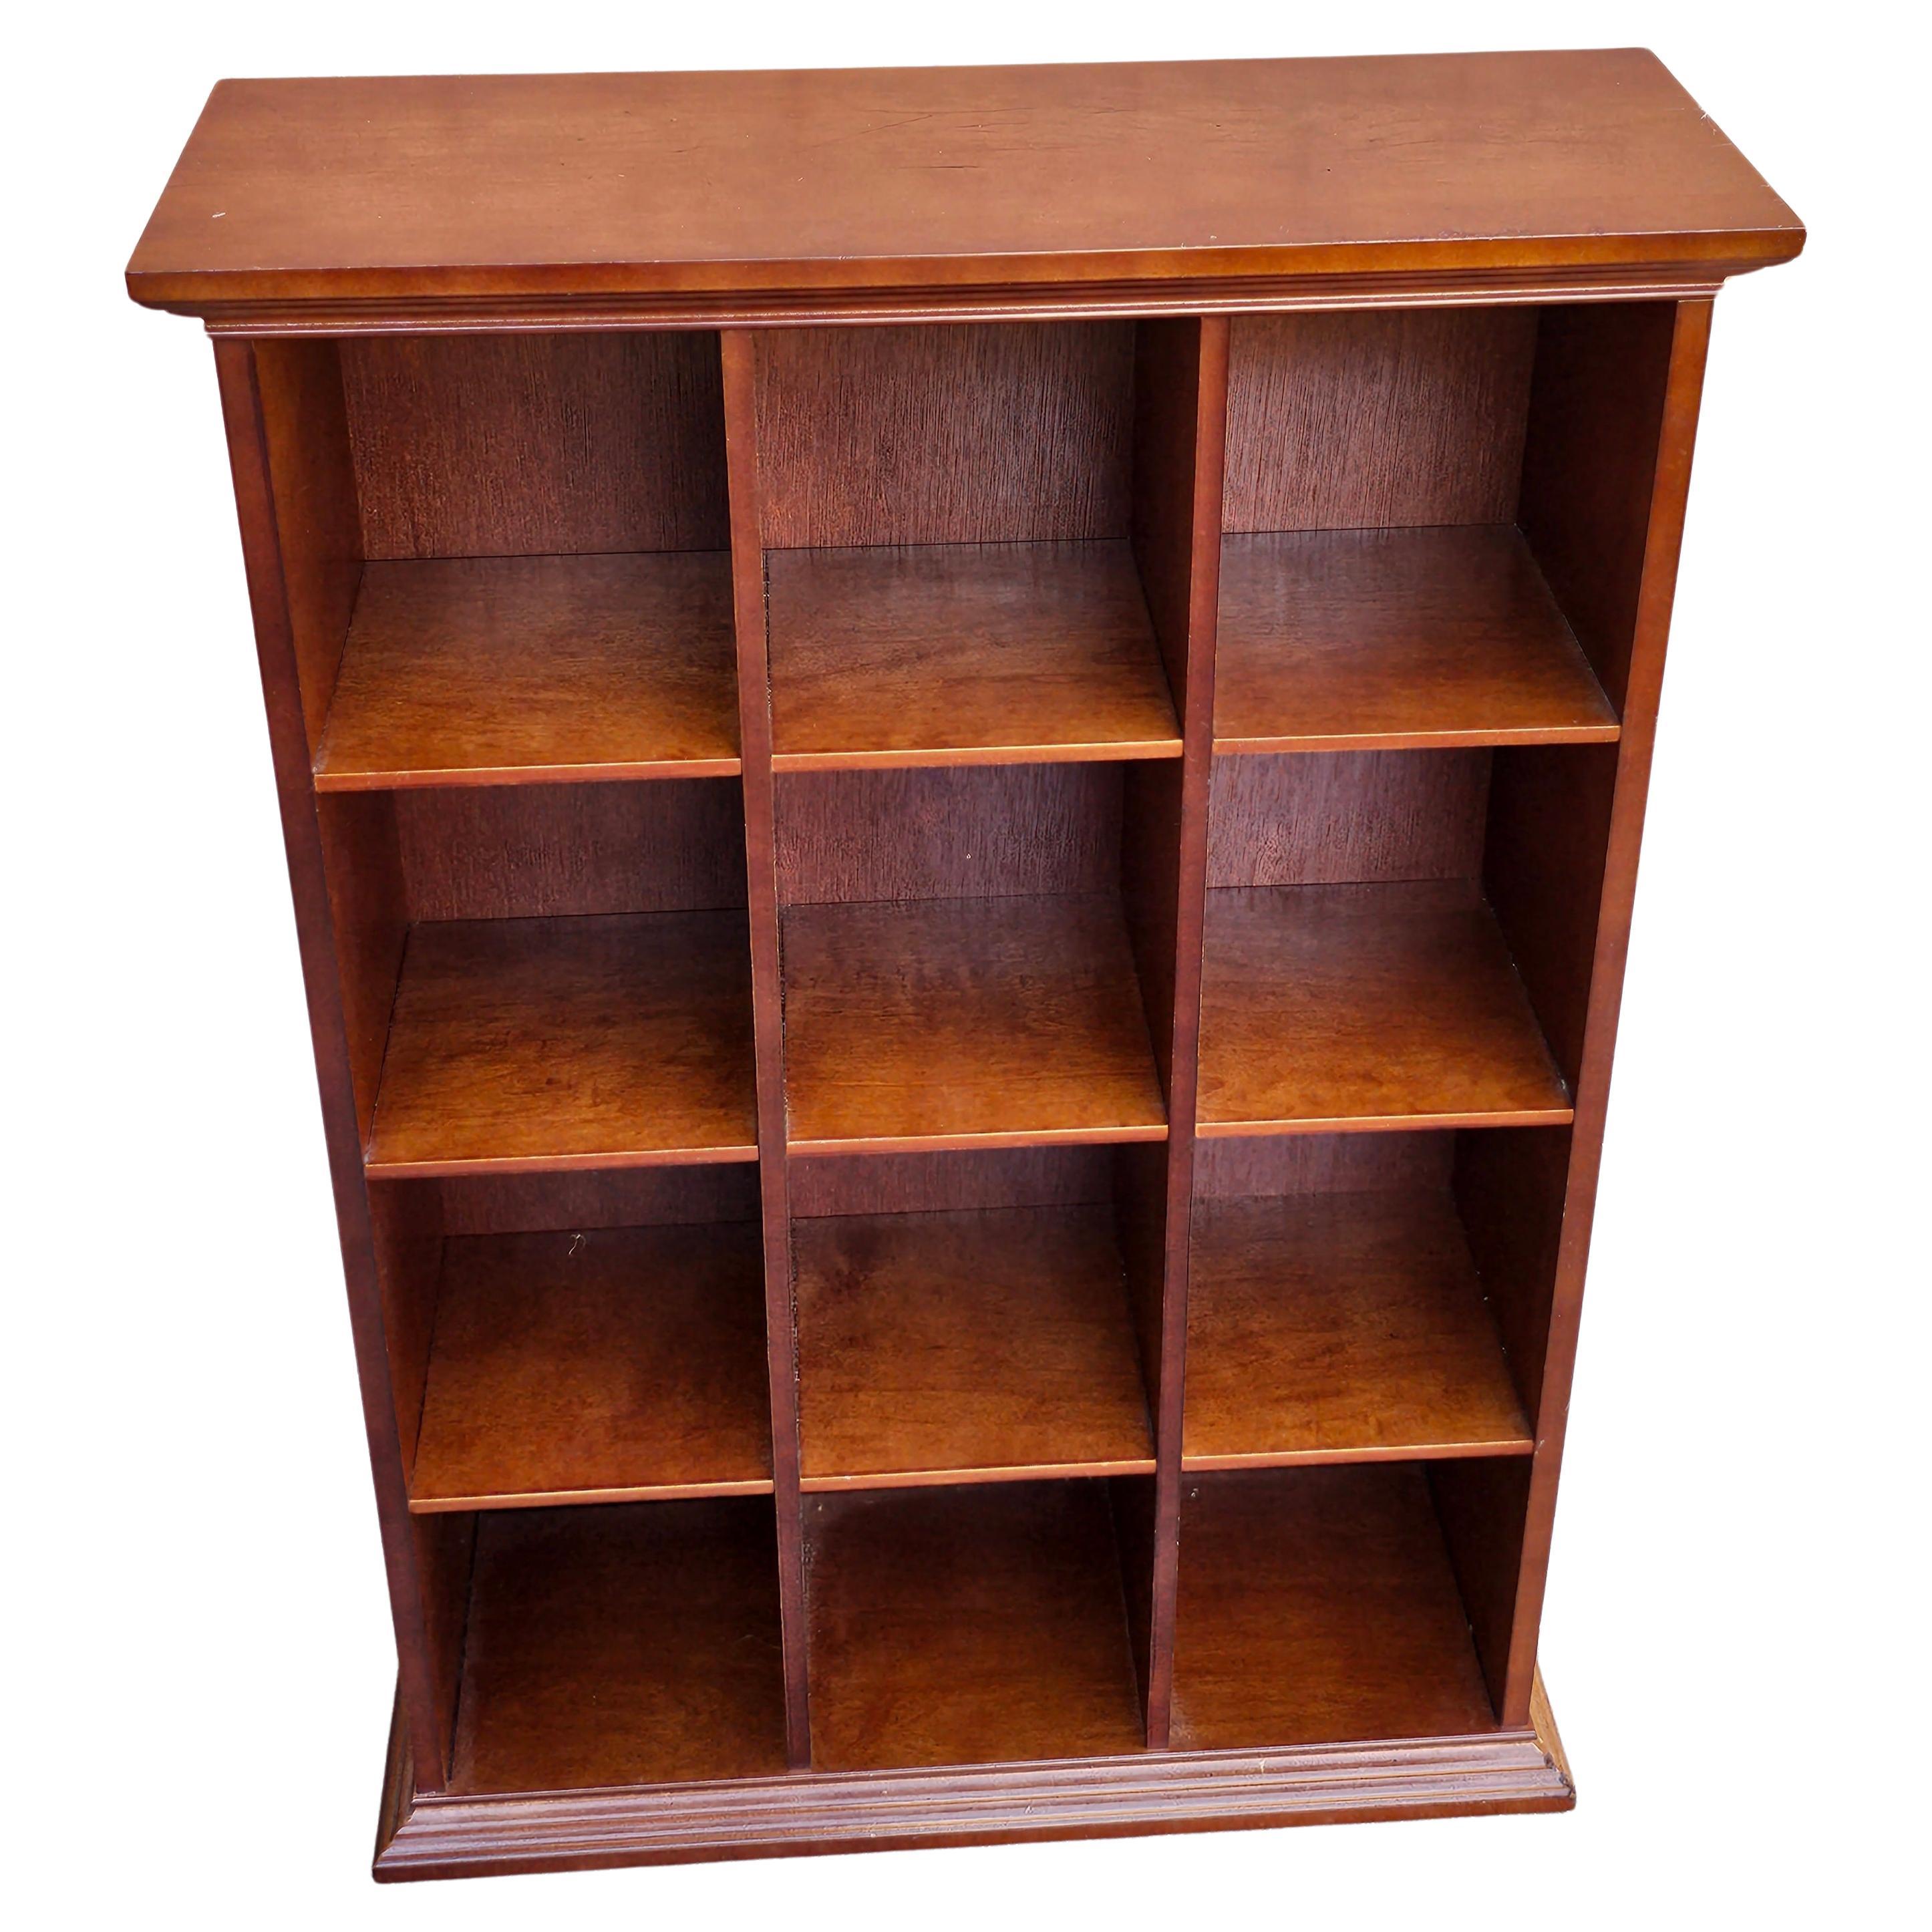 Late 20th Century Solid Cherry Pigeon Hole Cube Bookcase For Sale